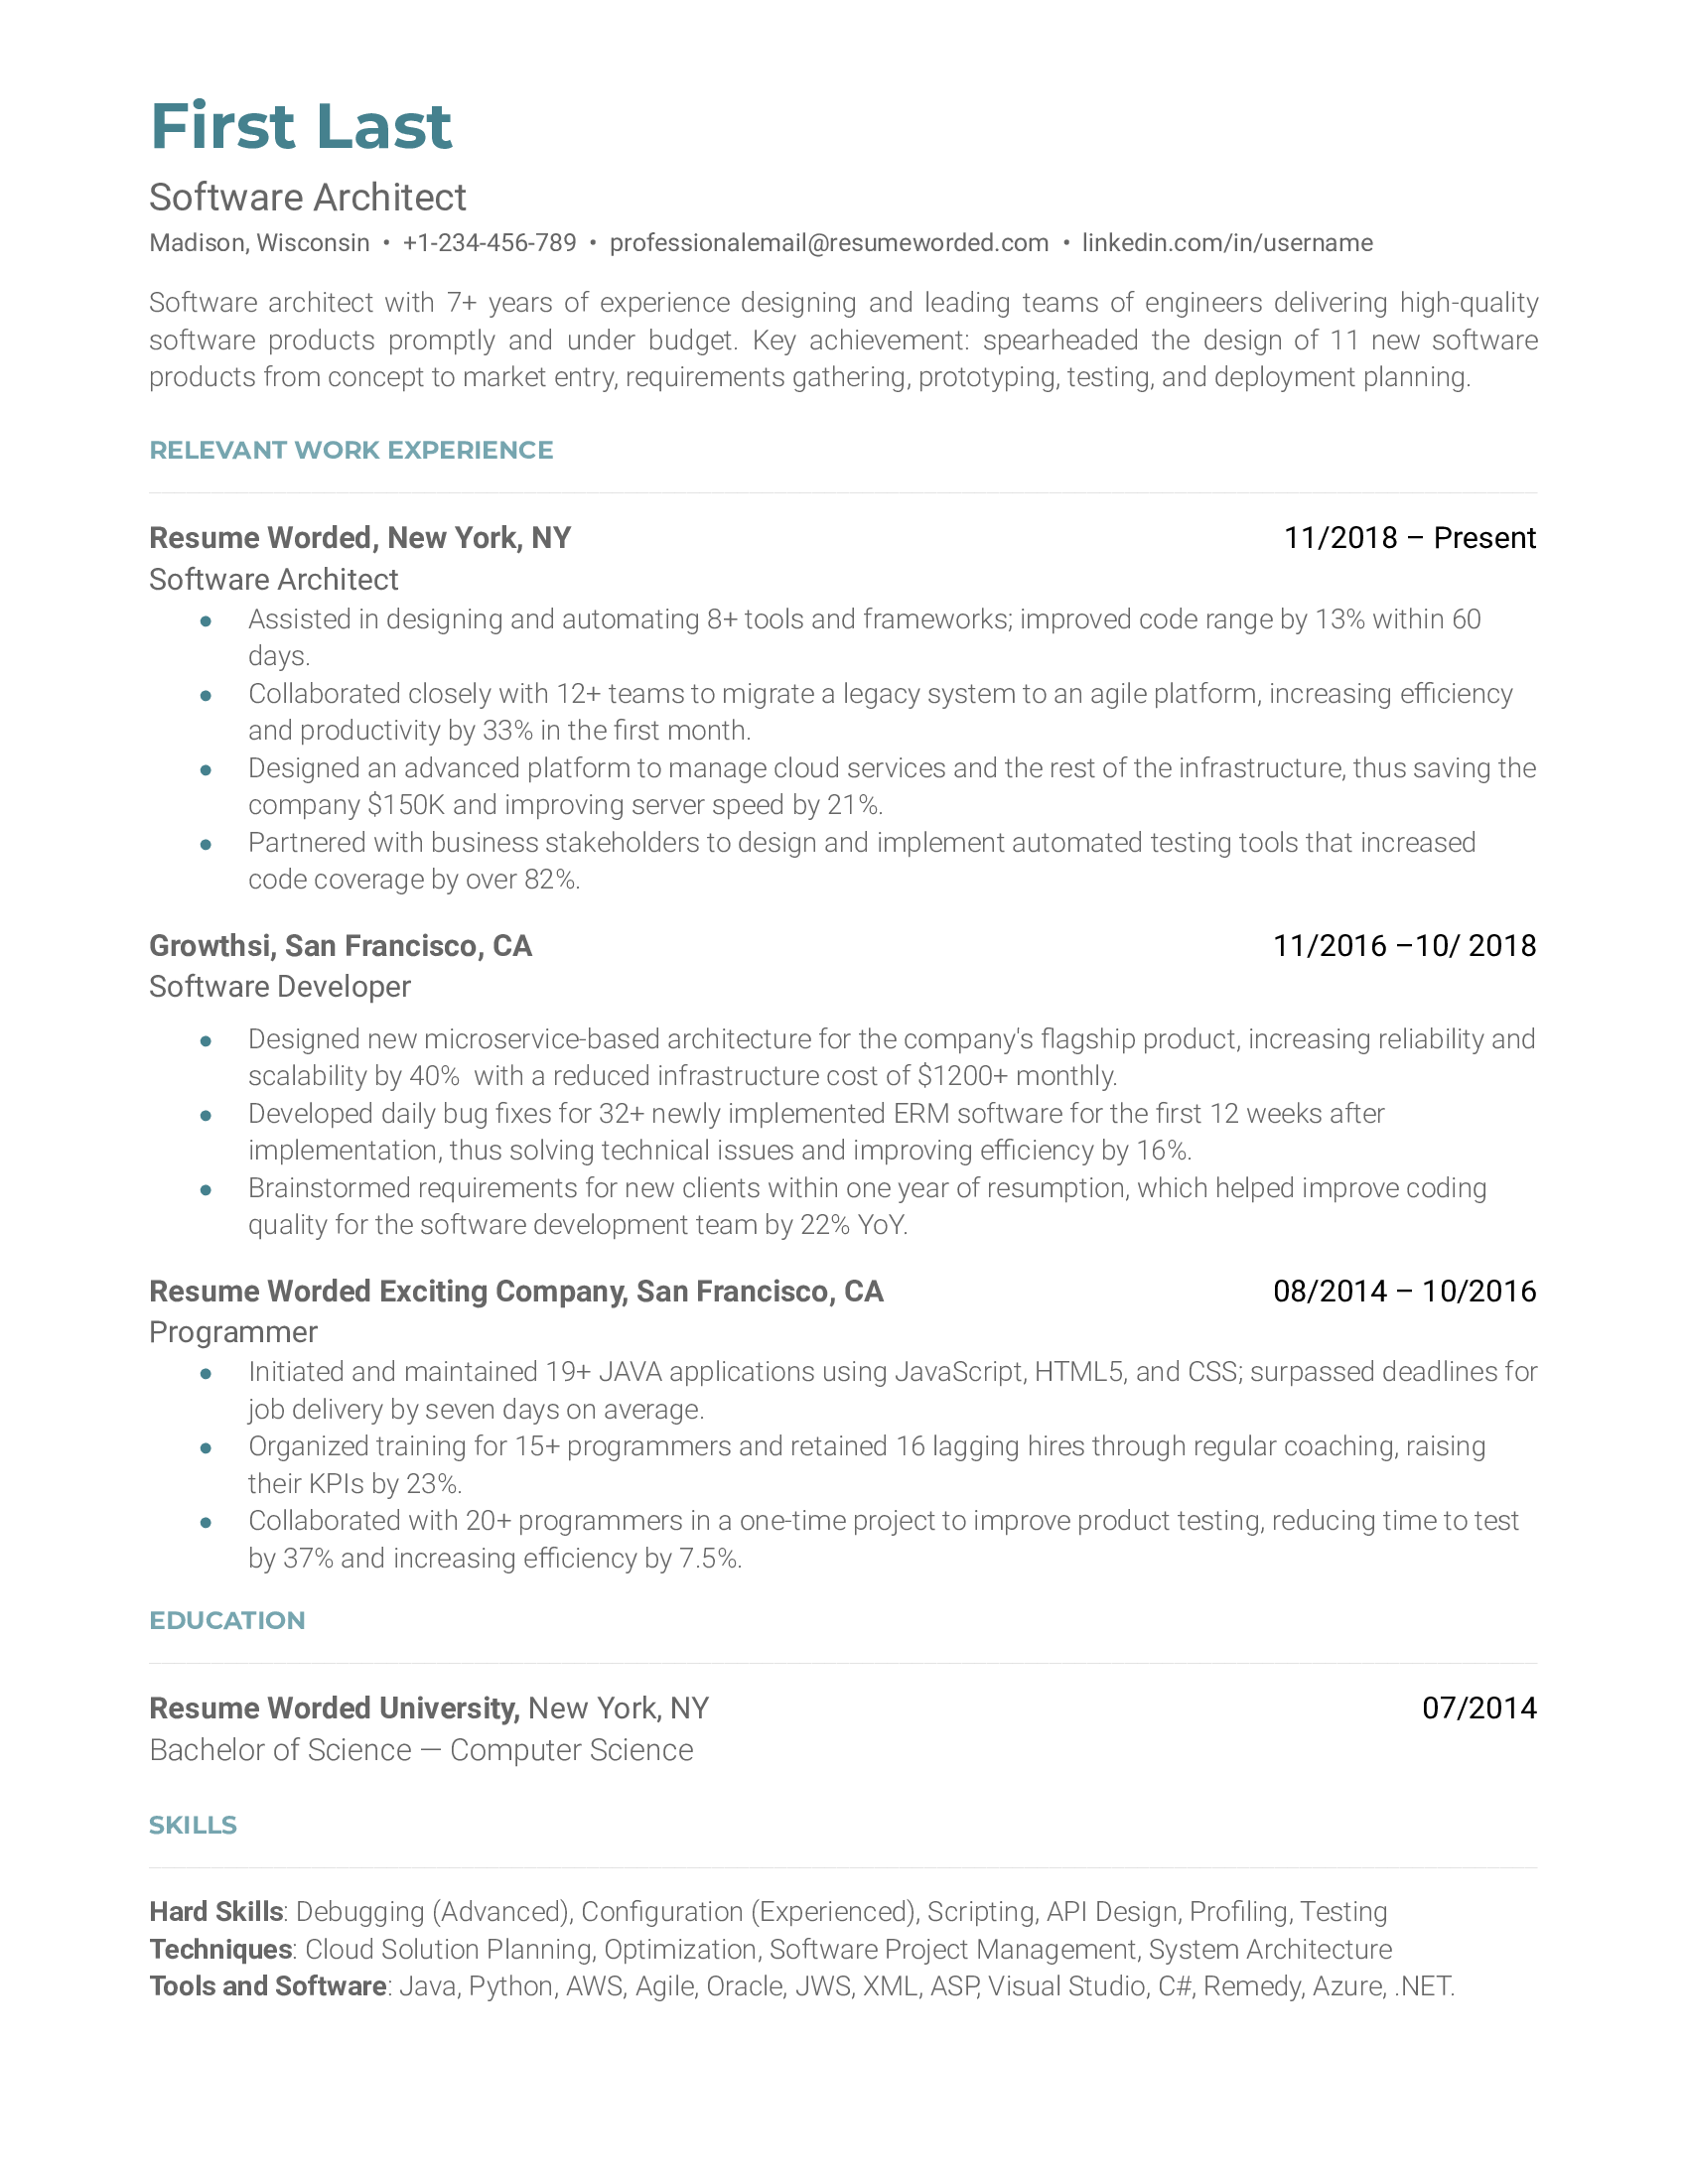 A well-structured CV of a Software Architect focusing on technical skills and project experiences.